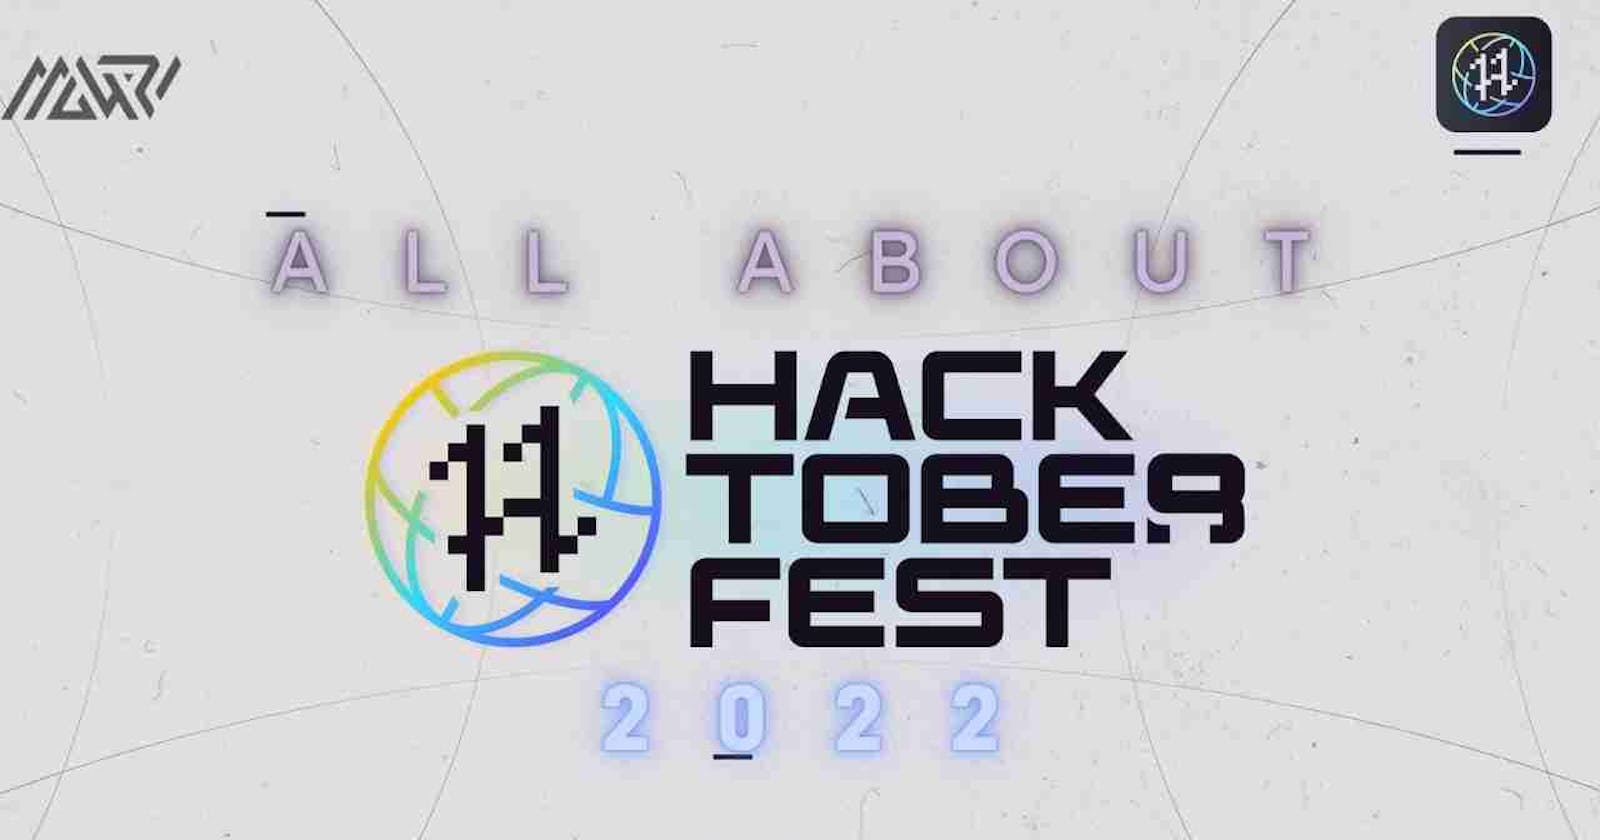 All About Hacktober Fest 2022 You Need To Know